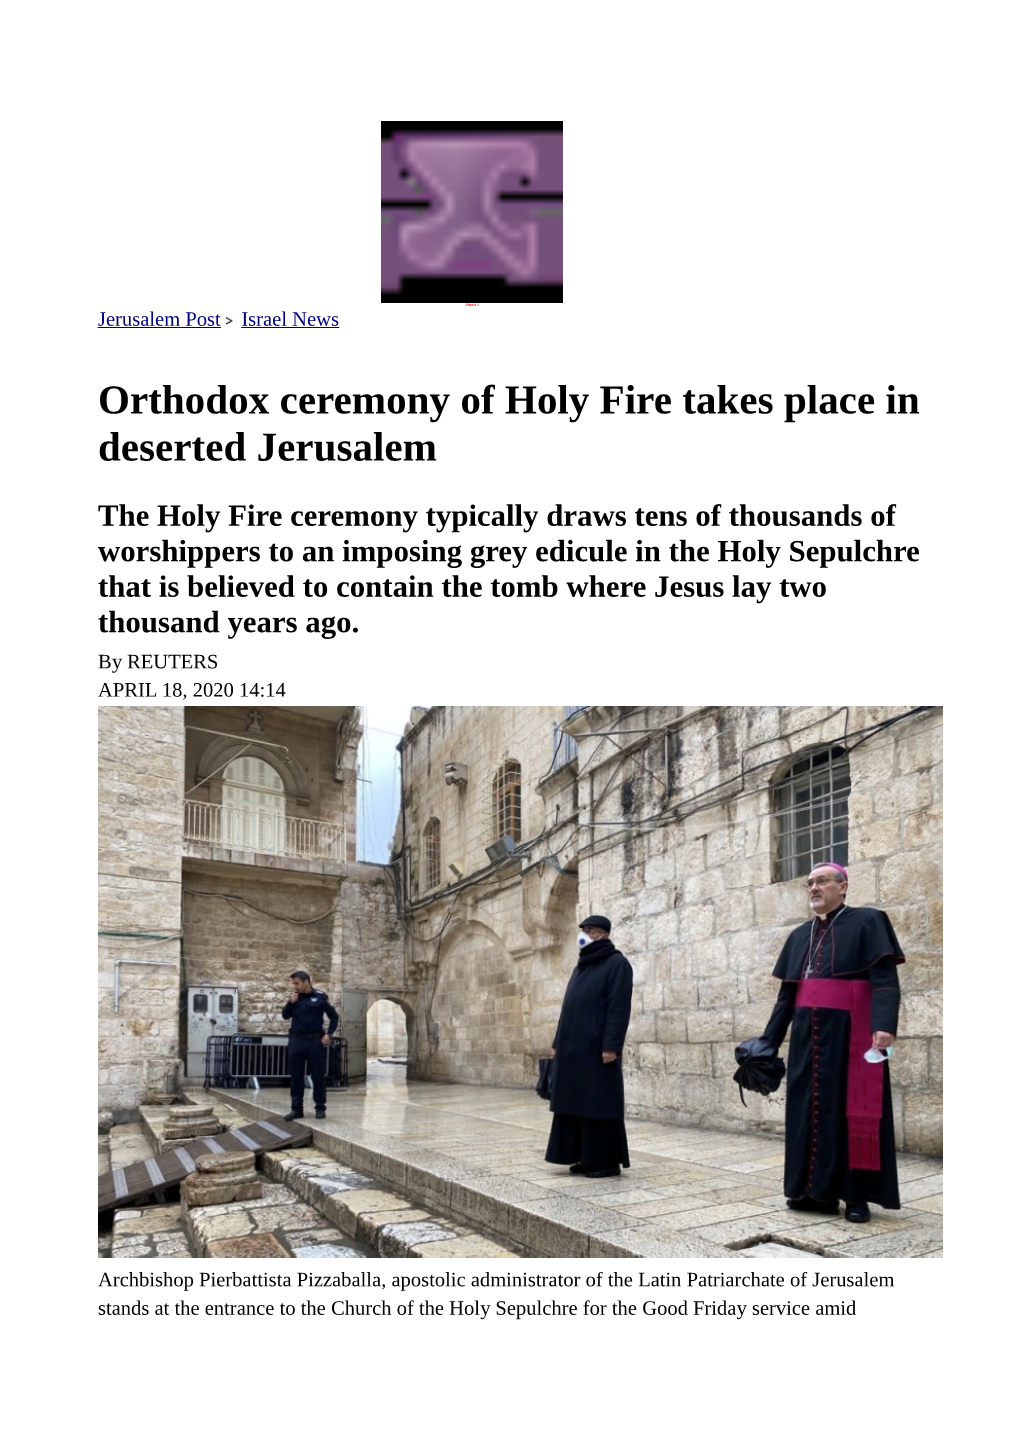 Orthodox Ceremony of Holy Fire Takes Place in Deserted Jerusalem